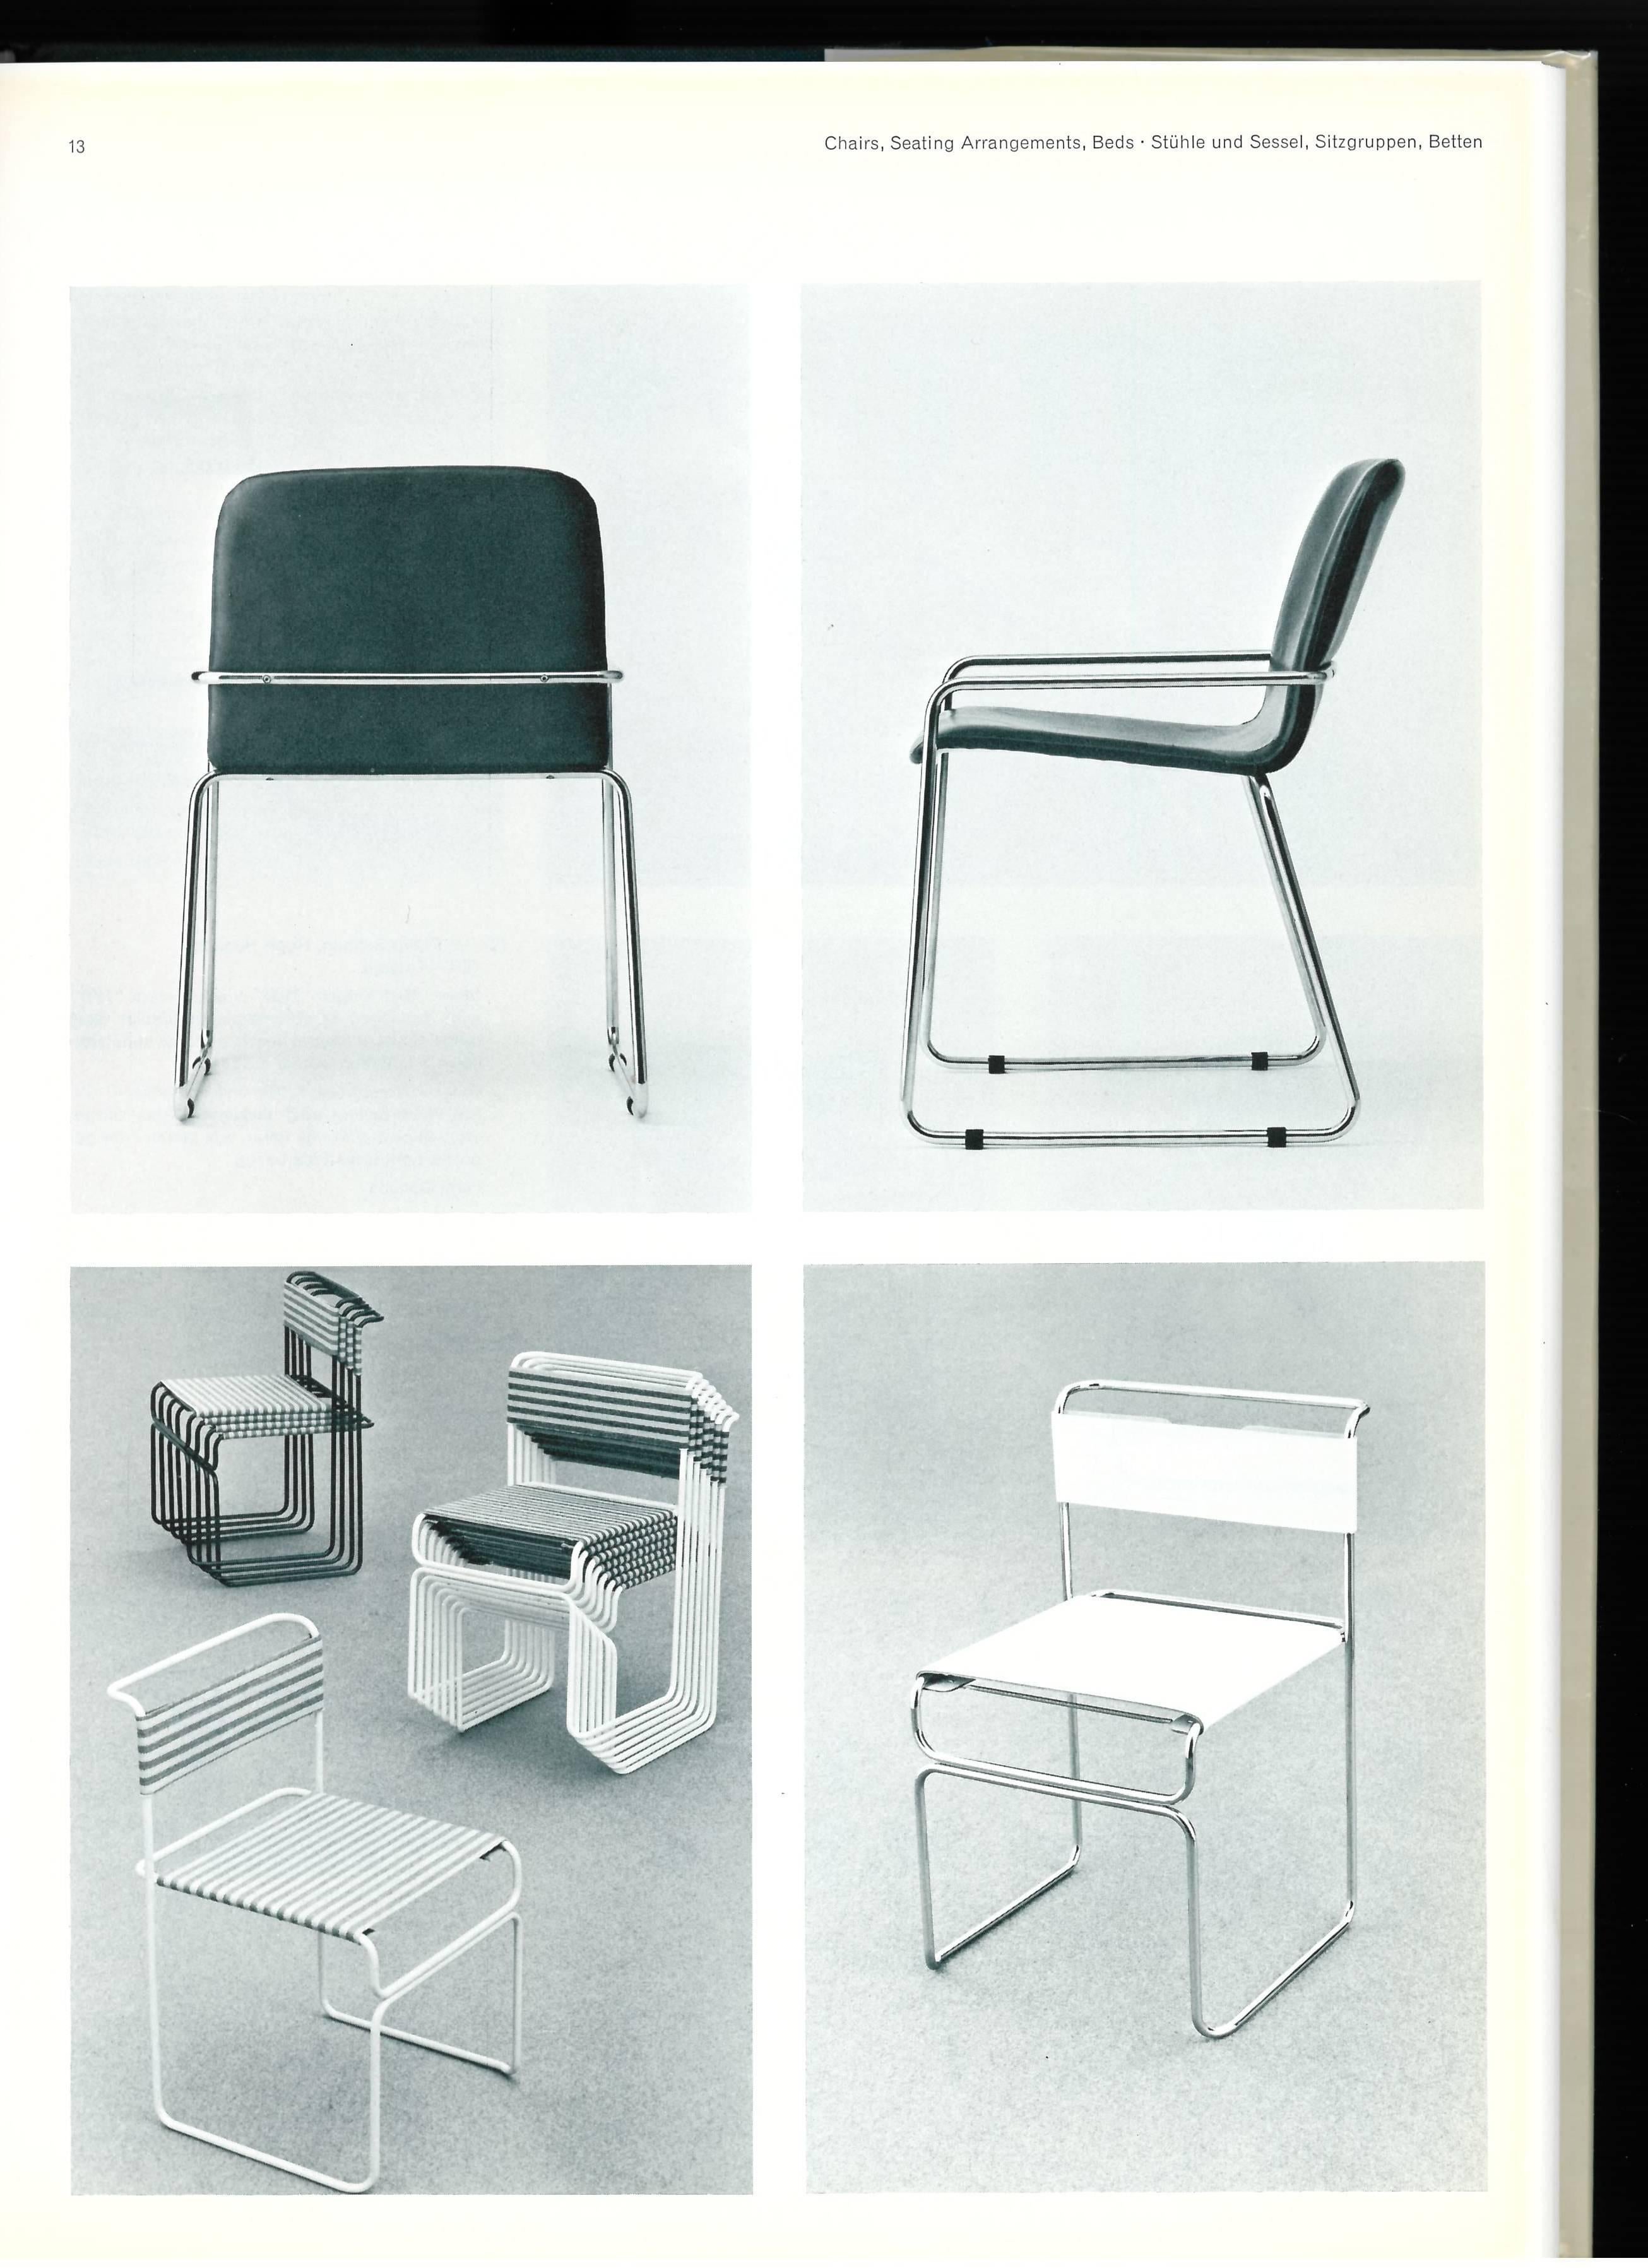 Published in 1973, this book offers in five chapters a review of new chairs, settees and beds, tables, office furniture, cabinets and shelves as well as nursery furniture. The photographs within the book were chosen to show the factual use and